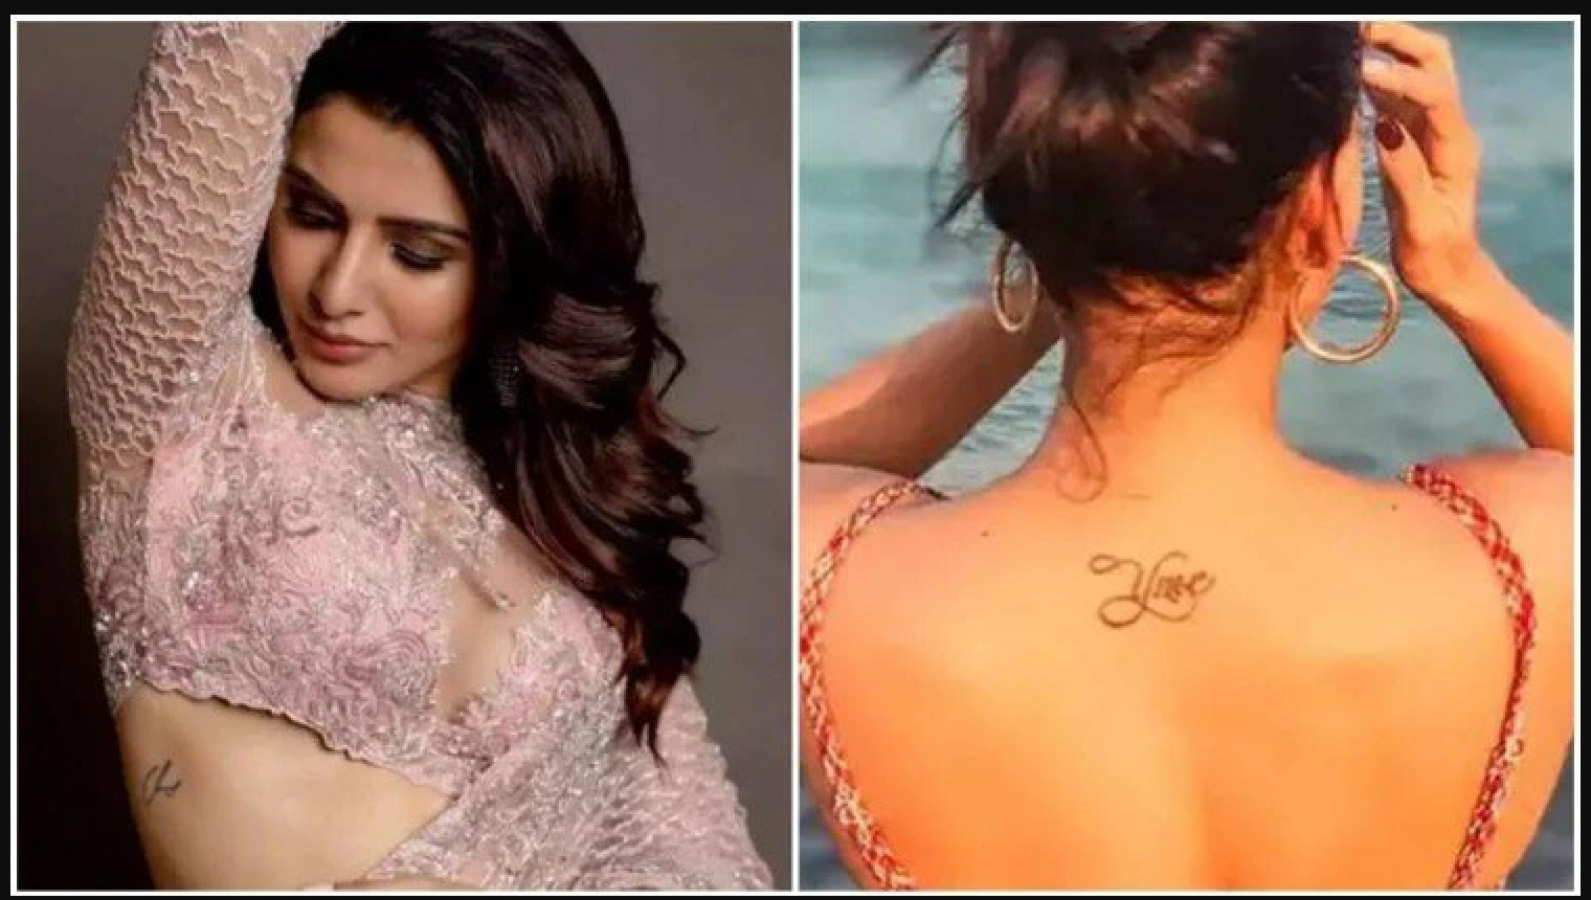 Tattoo Day Special: 10 Bollywood Tattoos We Absolutely Love - Urban Asian